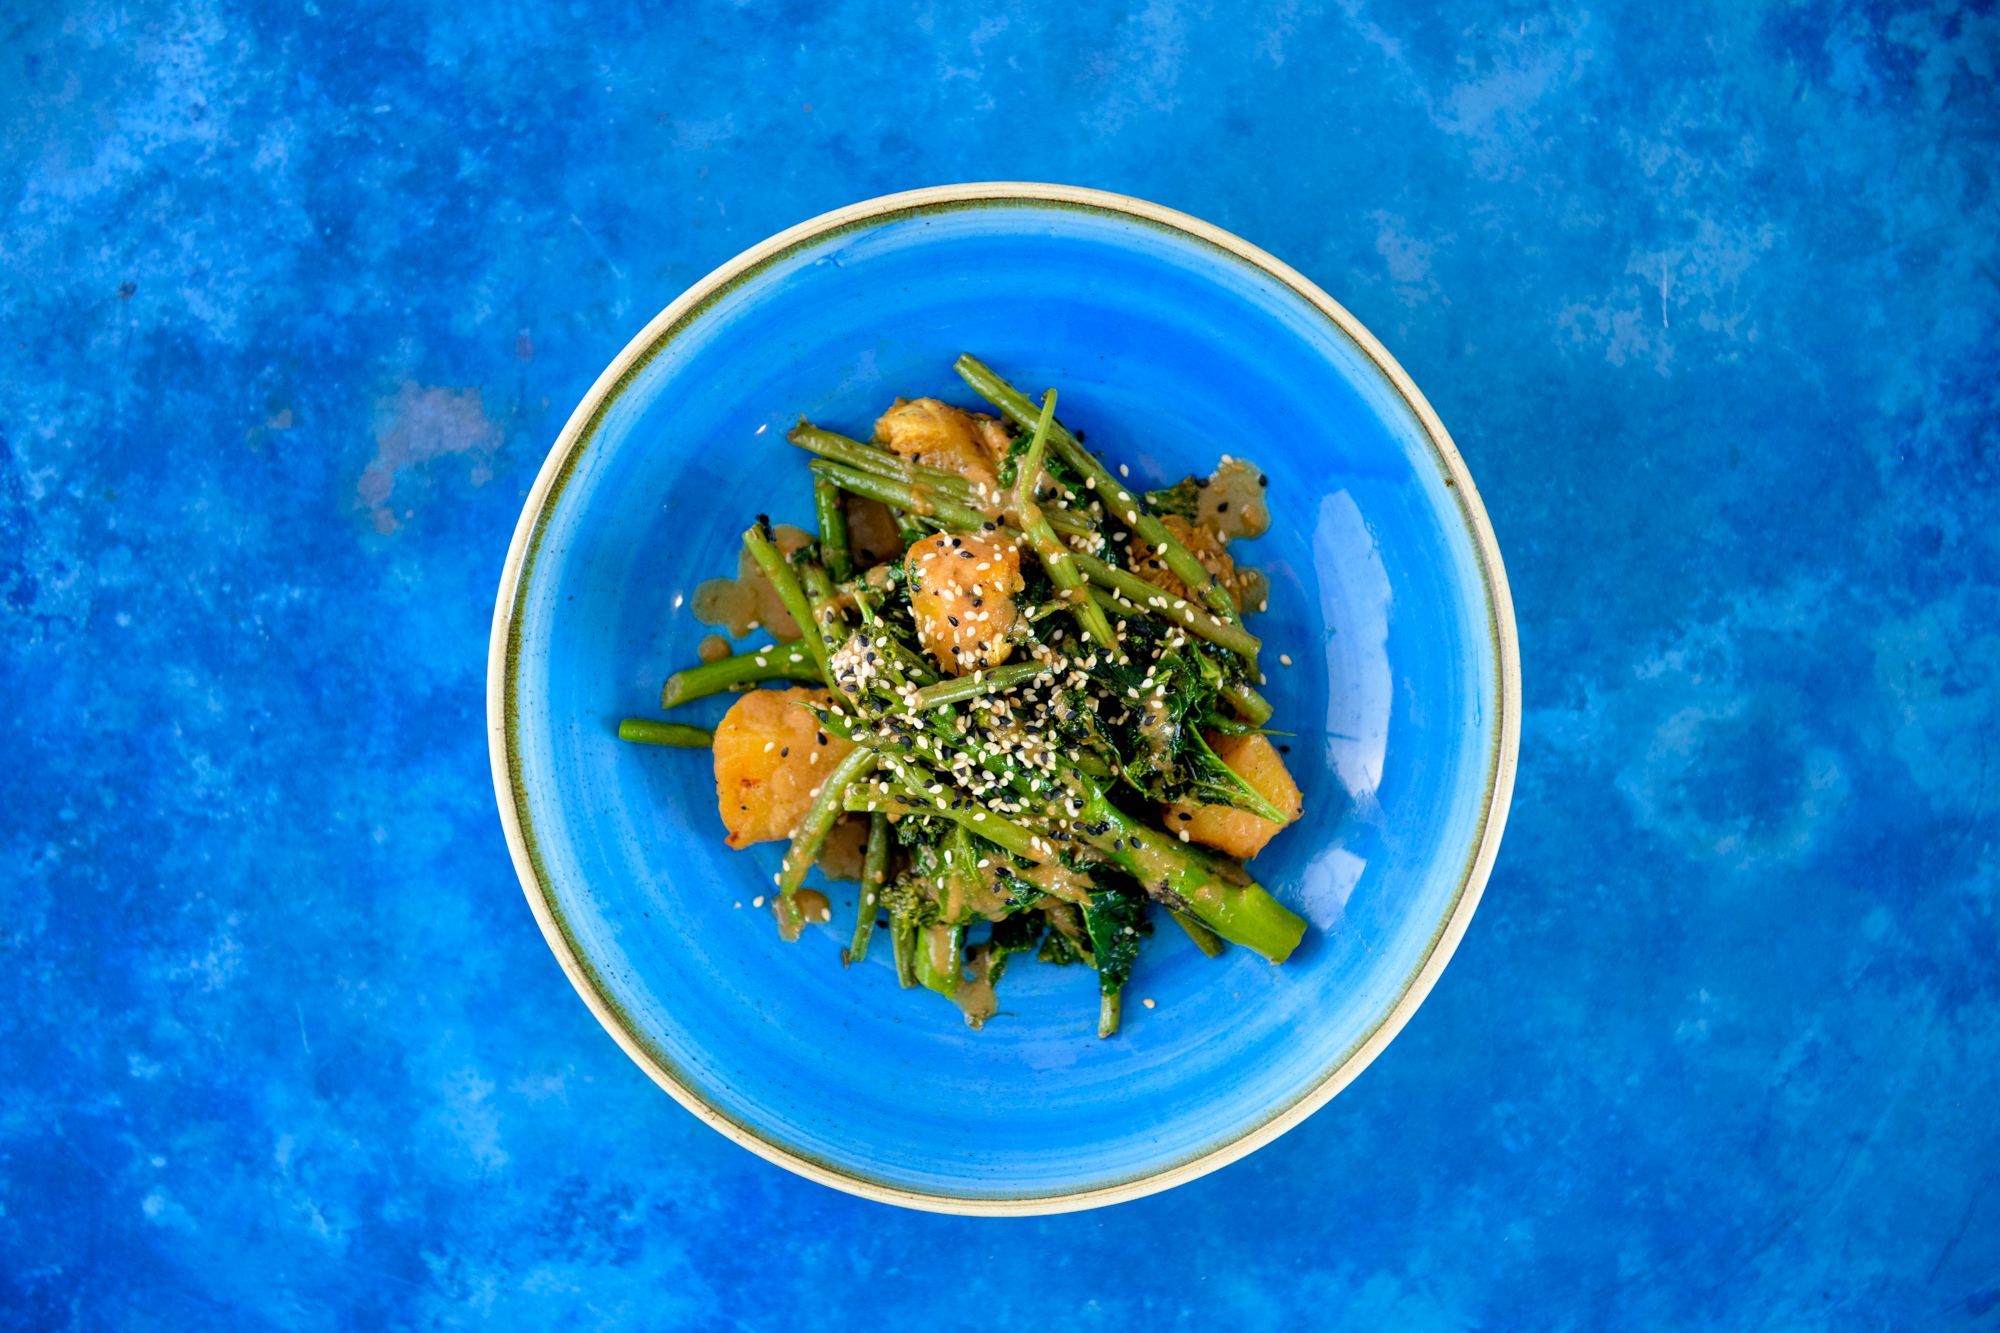 over head shot of the blue plate with green food, served on the blue table